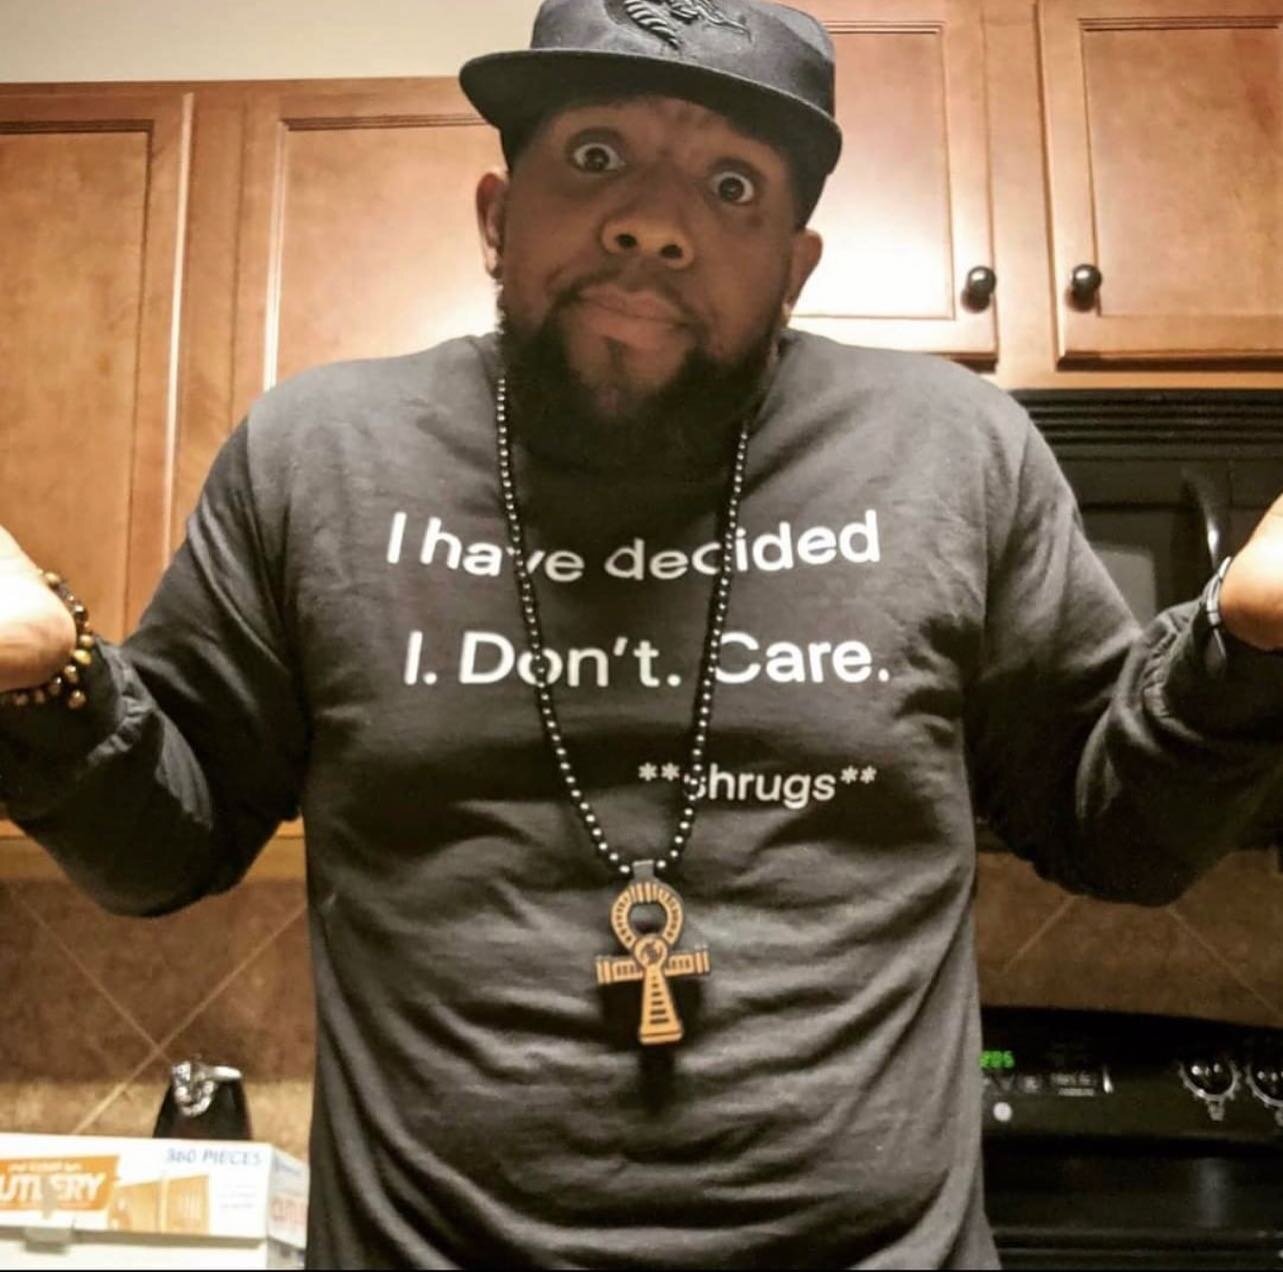 We learn in therapy how to set healthy boundaries.. and we DO NOT CARE who feels a way about it. TUH!🤷🏽&zwj;♀️
Grab a shirt from our swag shop! Link in our bio!
.
.
.
.
.
.
.
.
.
.
.
.
.
.
.#tshirtlife #idontcareanymore #tshirtstore #tshirtslovers 